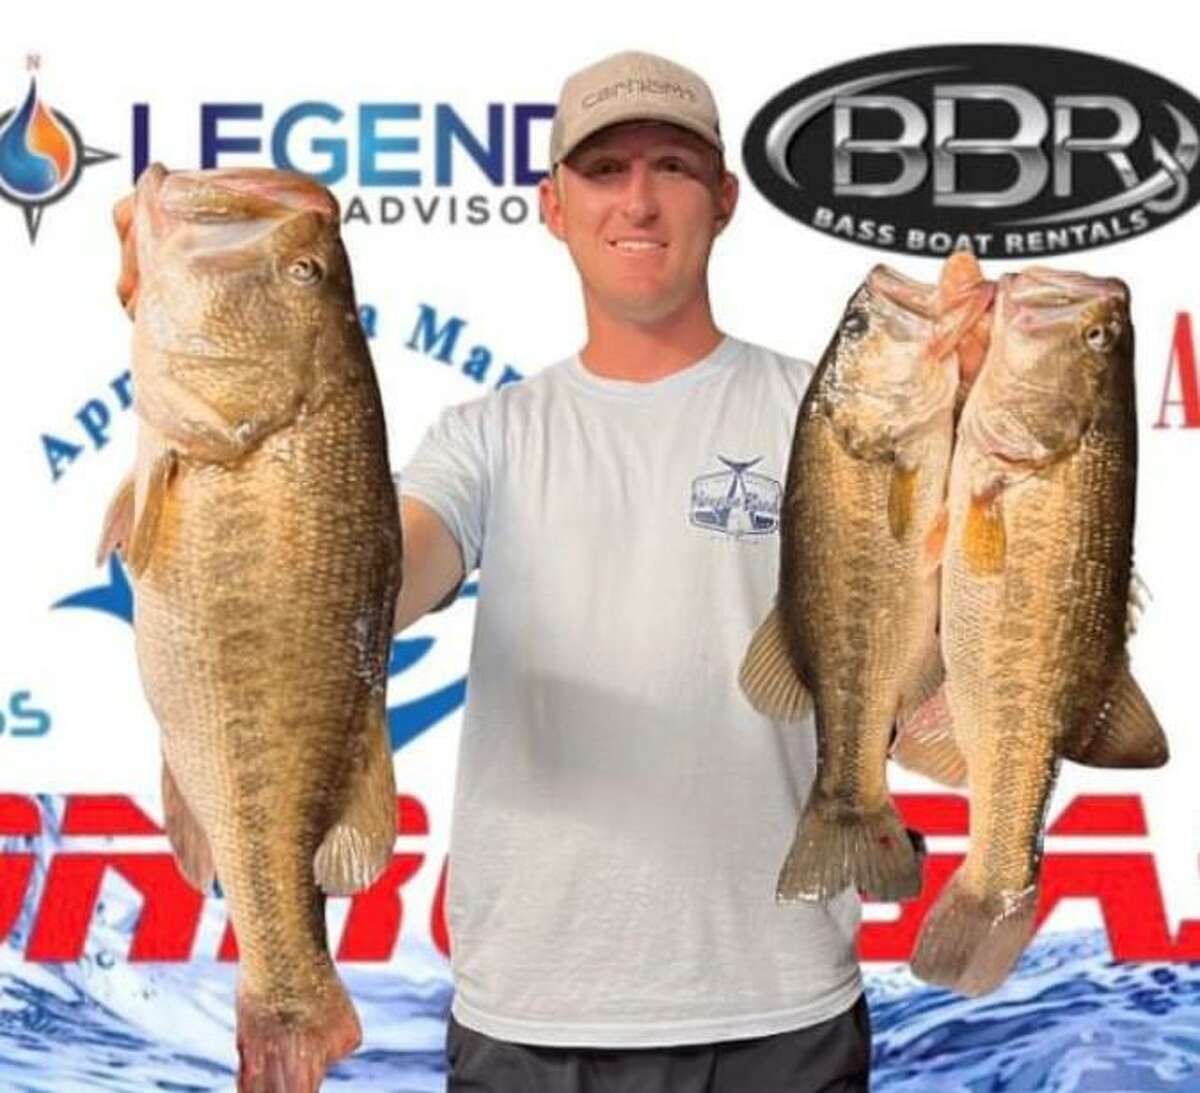 Derek Pietsch came in third place in the CONROEBASS Tuesday Tournament with a stringer weight of 13.56 pounds.